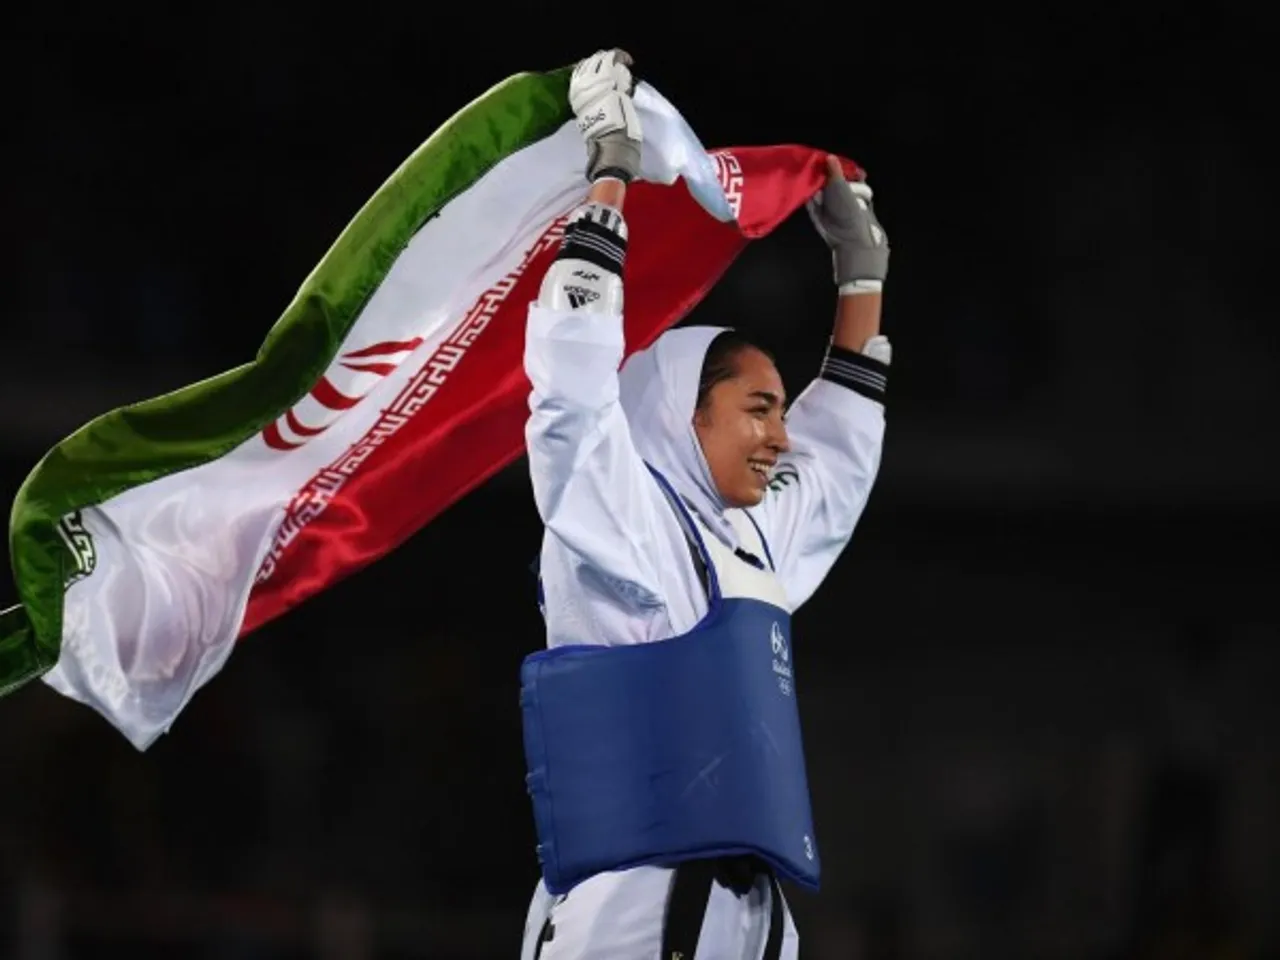 Conservative Iran elated by Kimia Alizadeh, first Iranian woman to win at Olympics